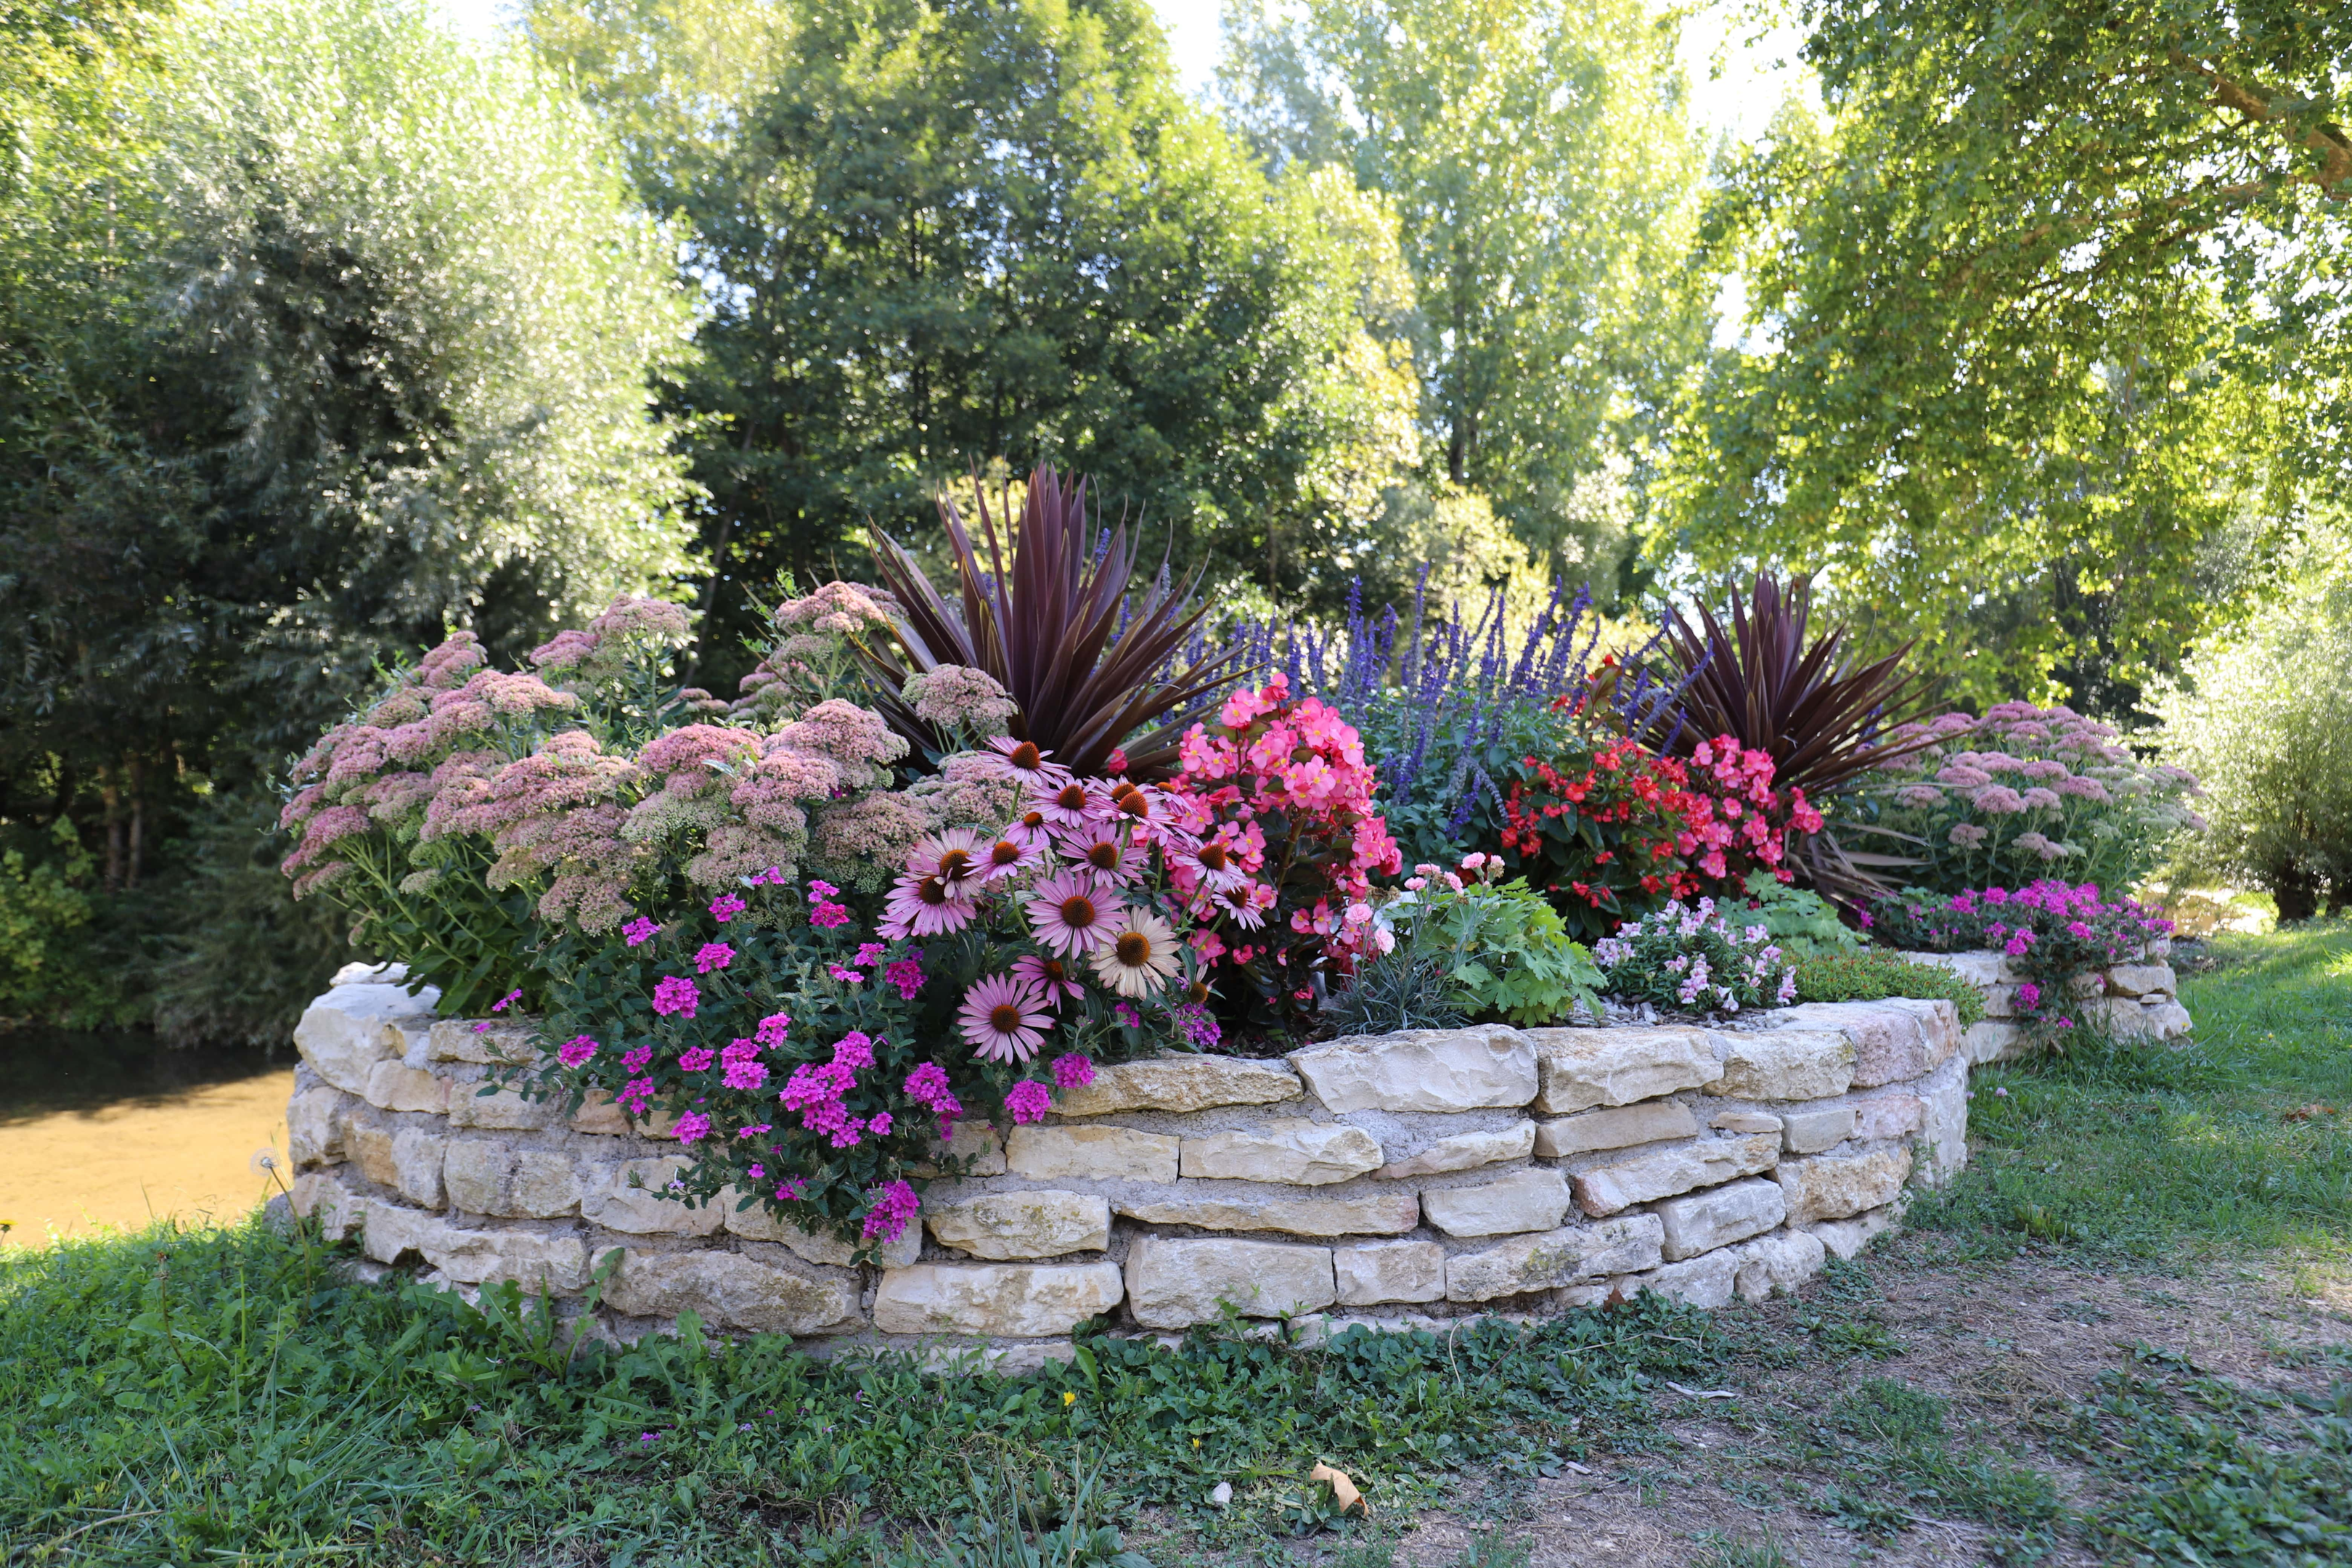 a natural stone wall around a garden bed in the middle of a yard